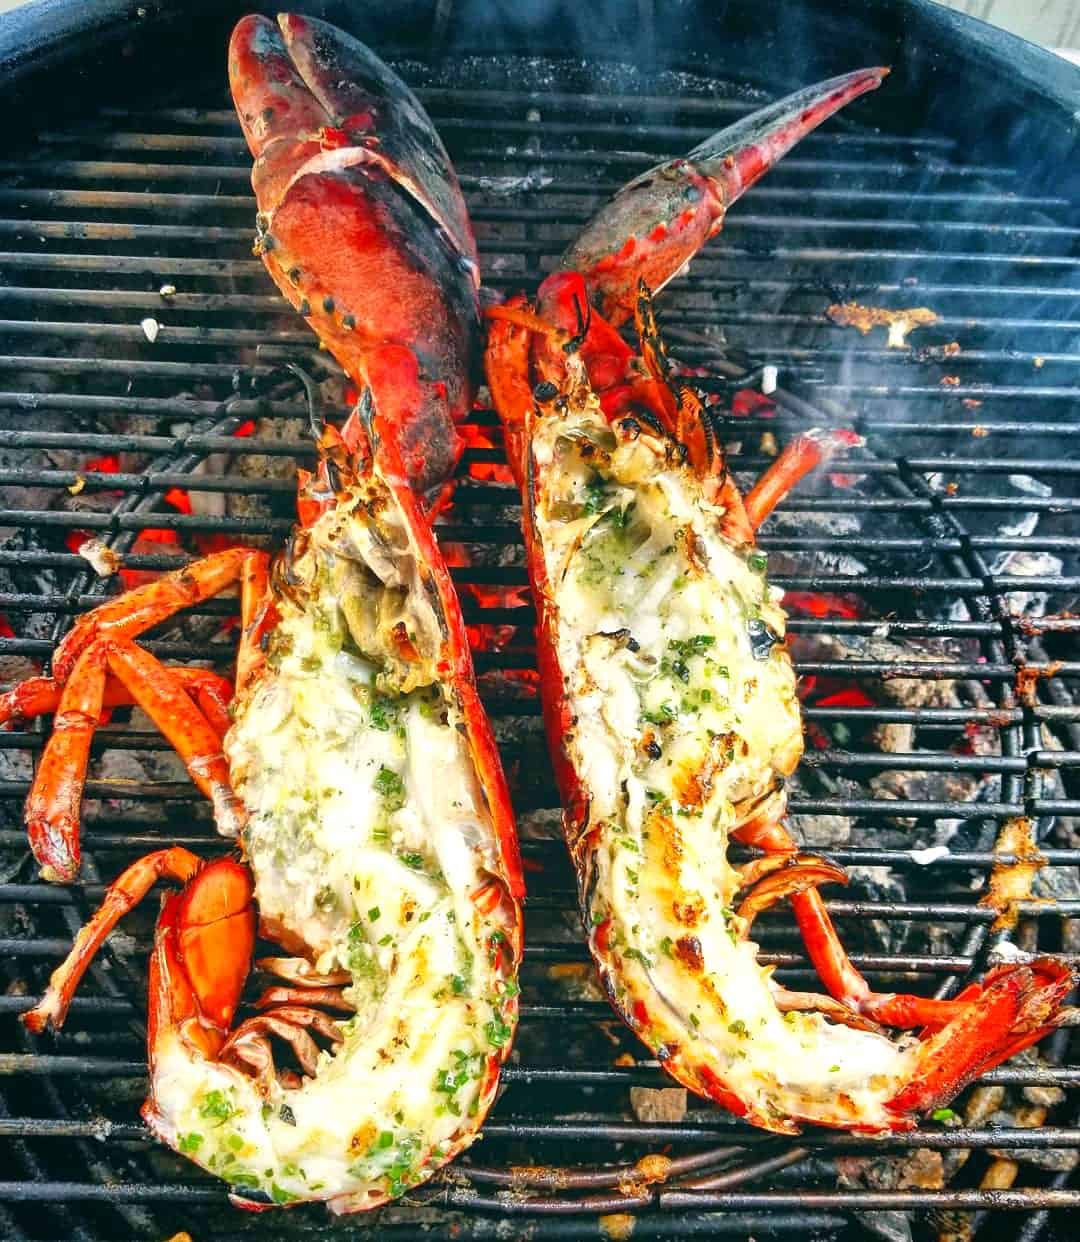 How to Grill Whole Lobsters